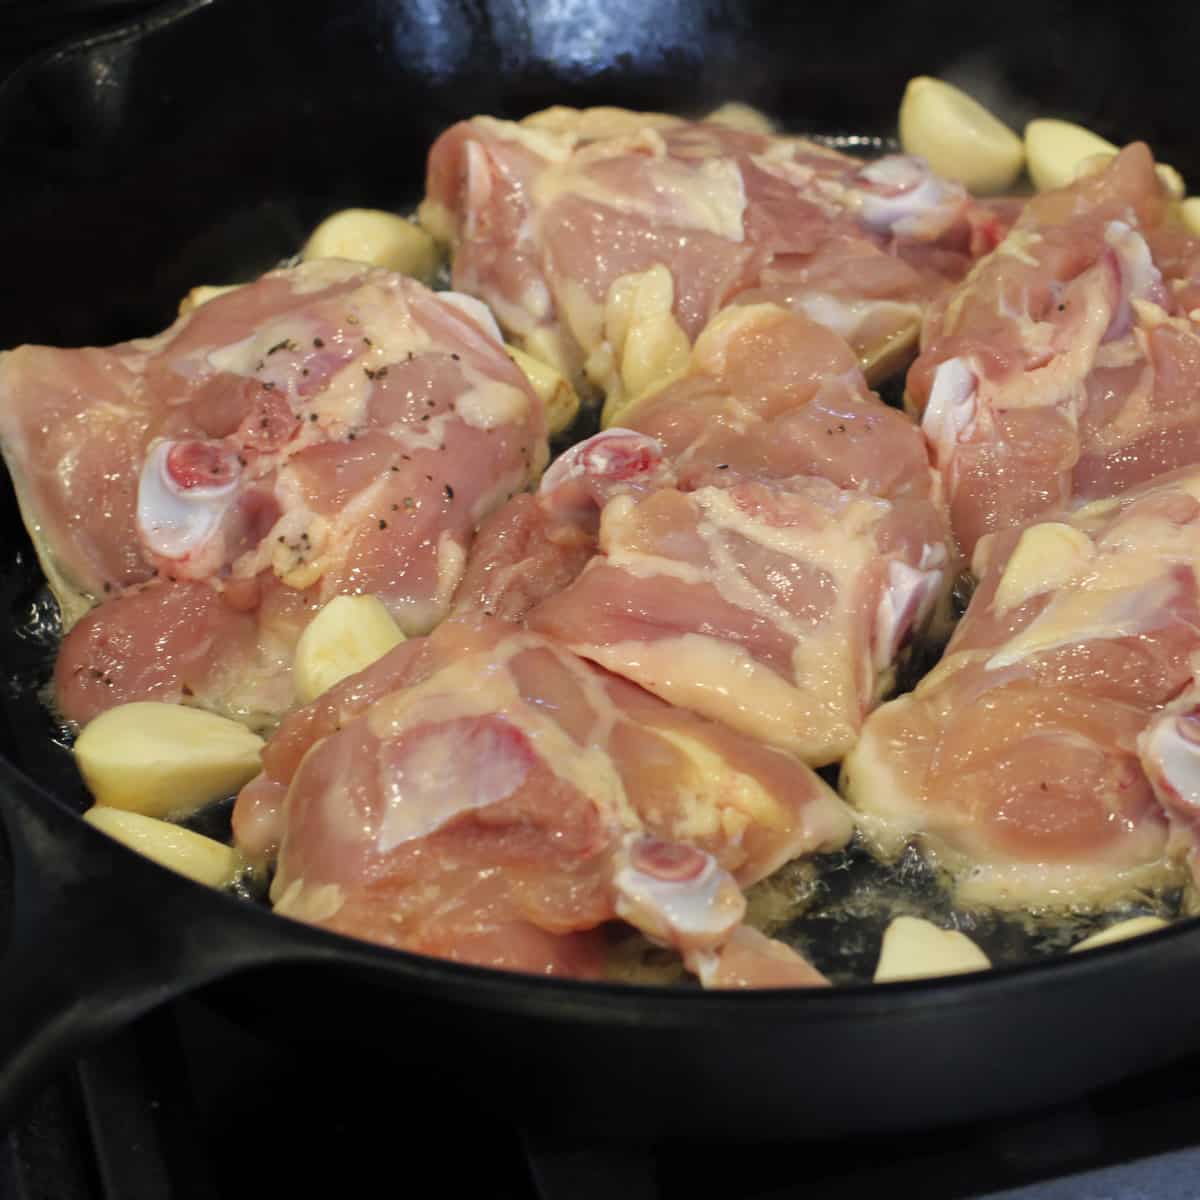 Raw chicken and garlic in a pan.